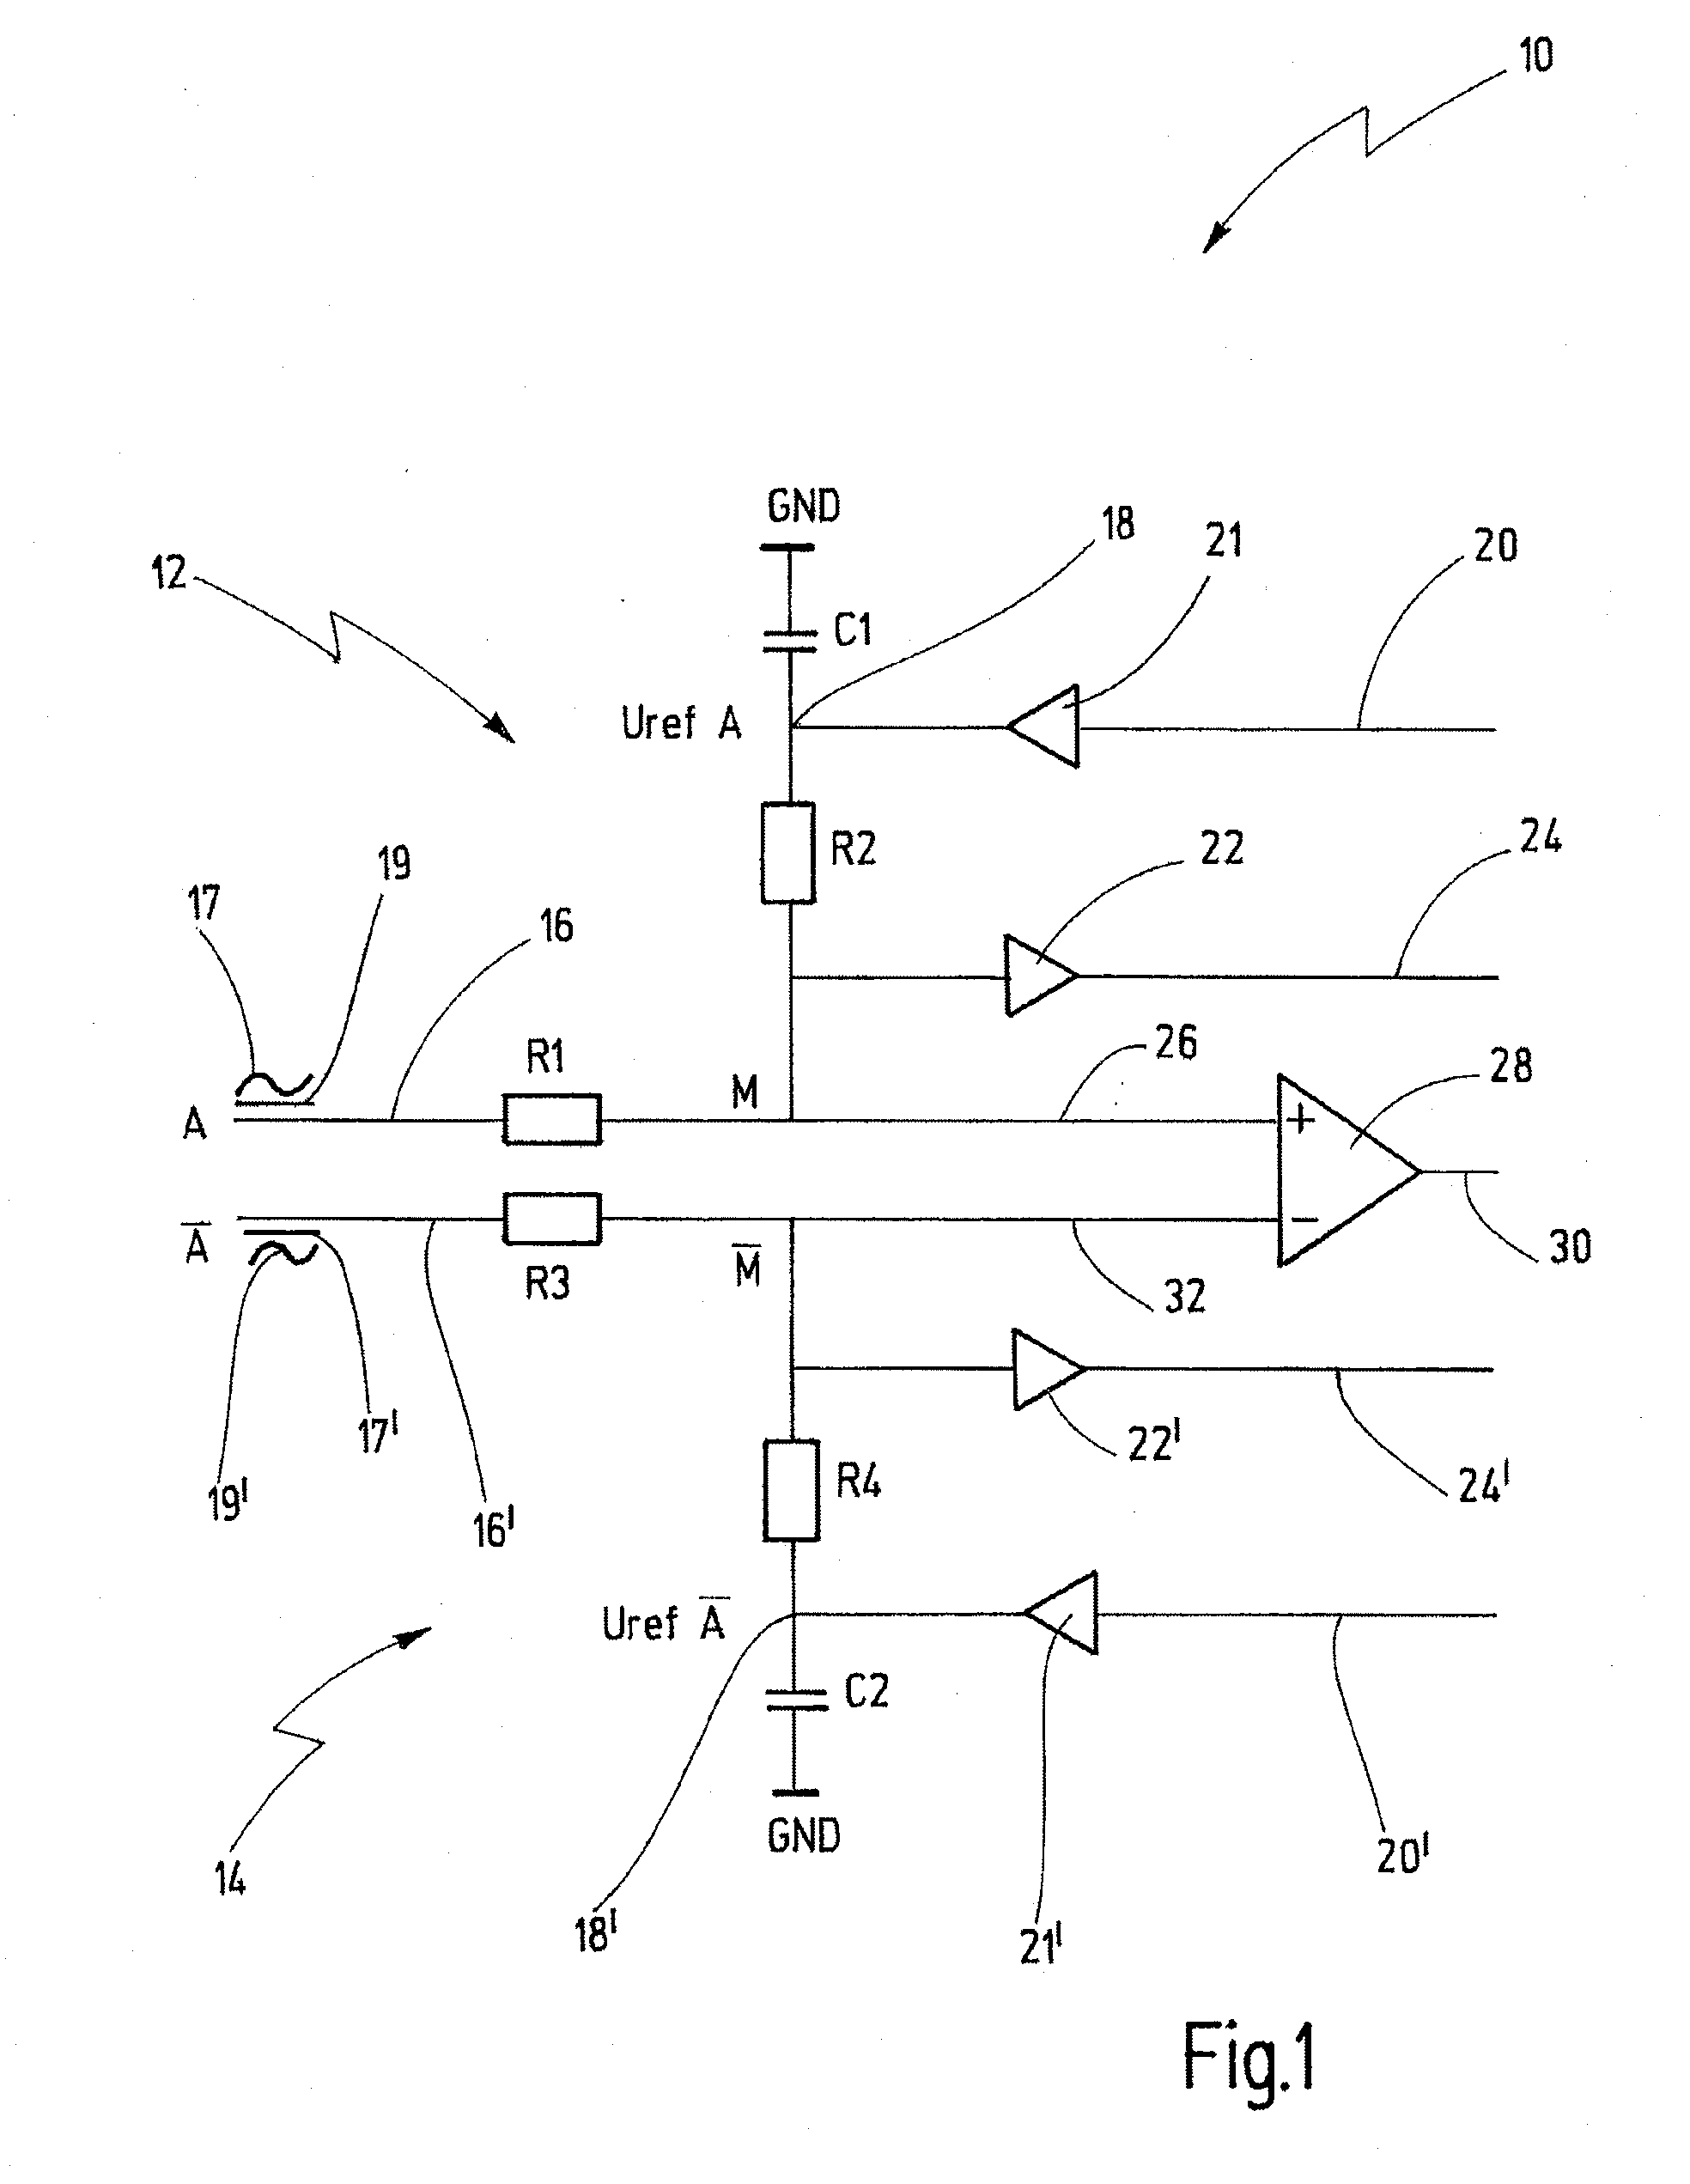 Safety circuit arrangement and method for the fail-safe monitoring of a movement variable